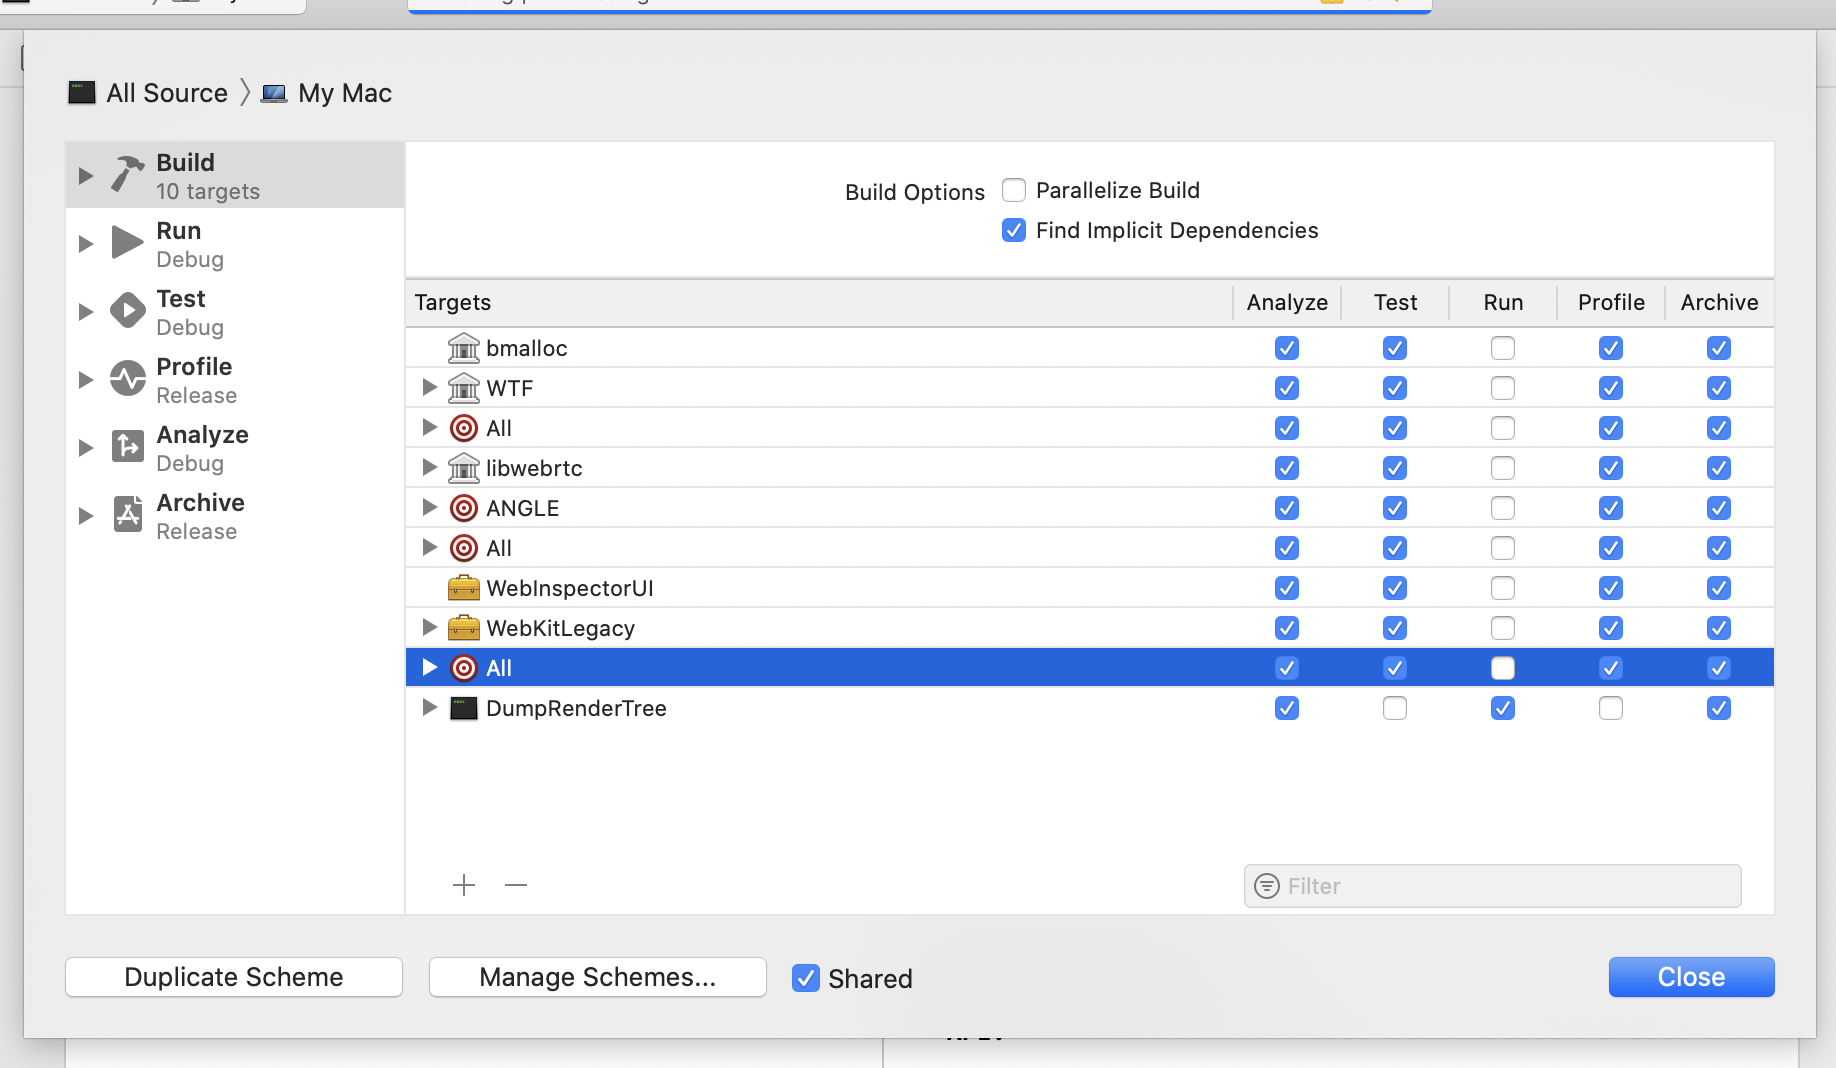 Screenshot of Xcode unchecking build options for all but DumpRenderTree for "Run" scheme